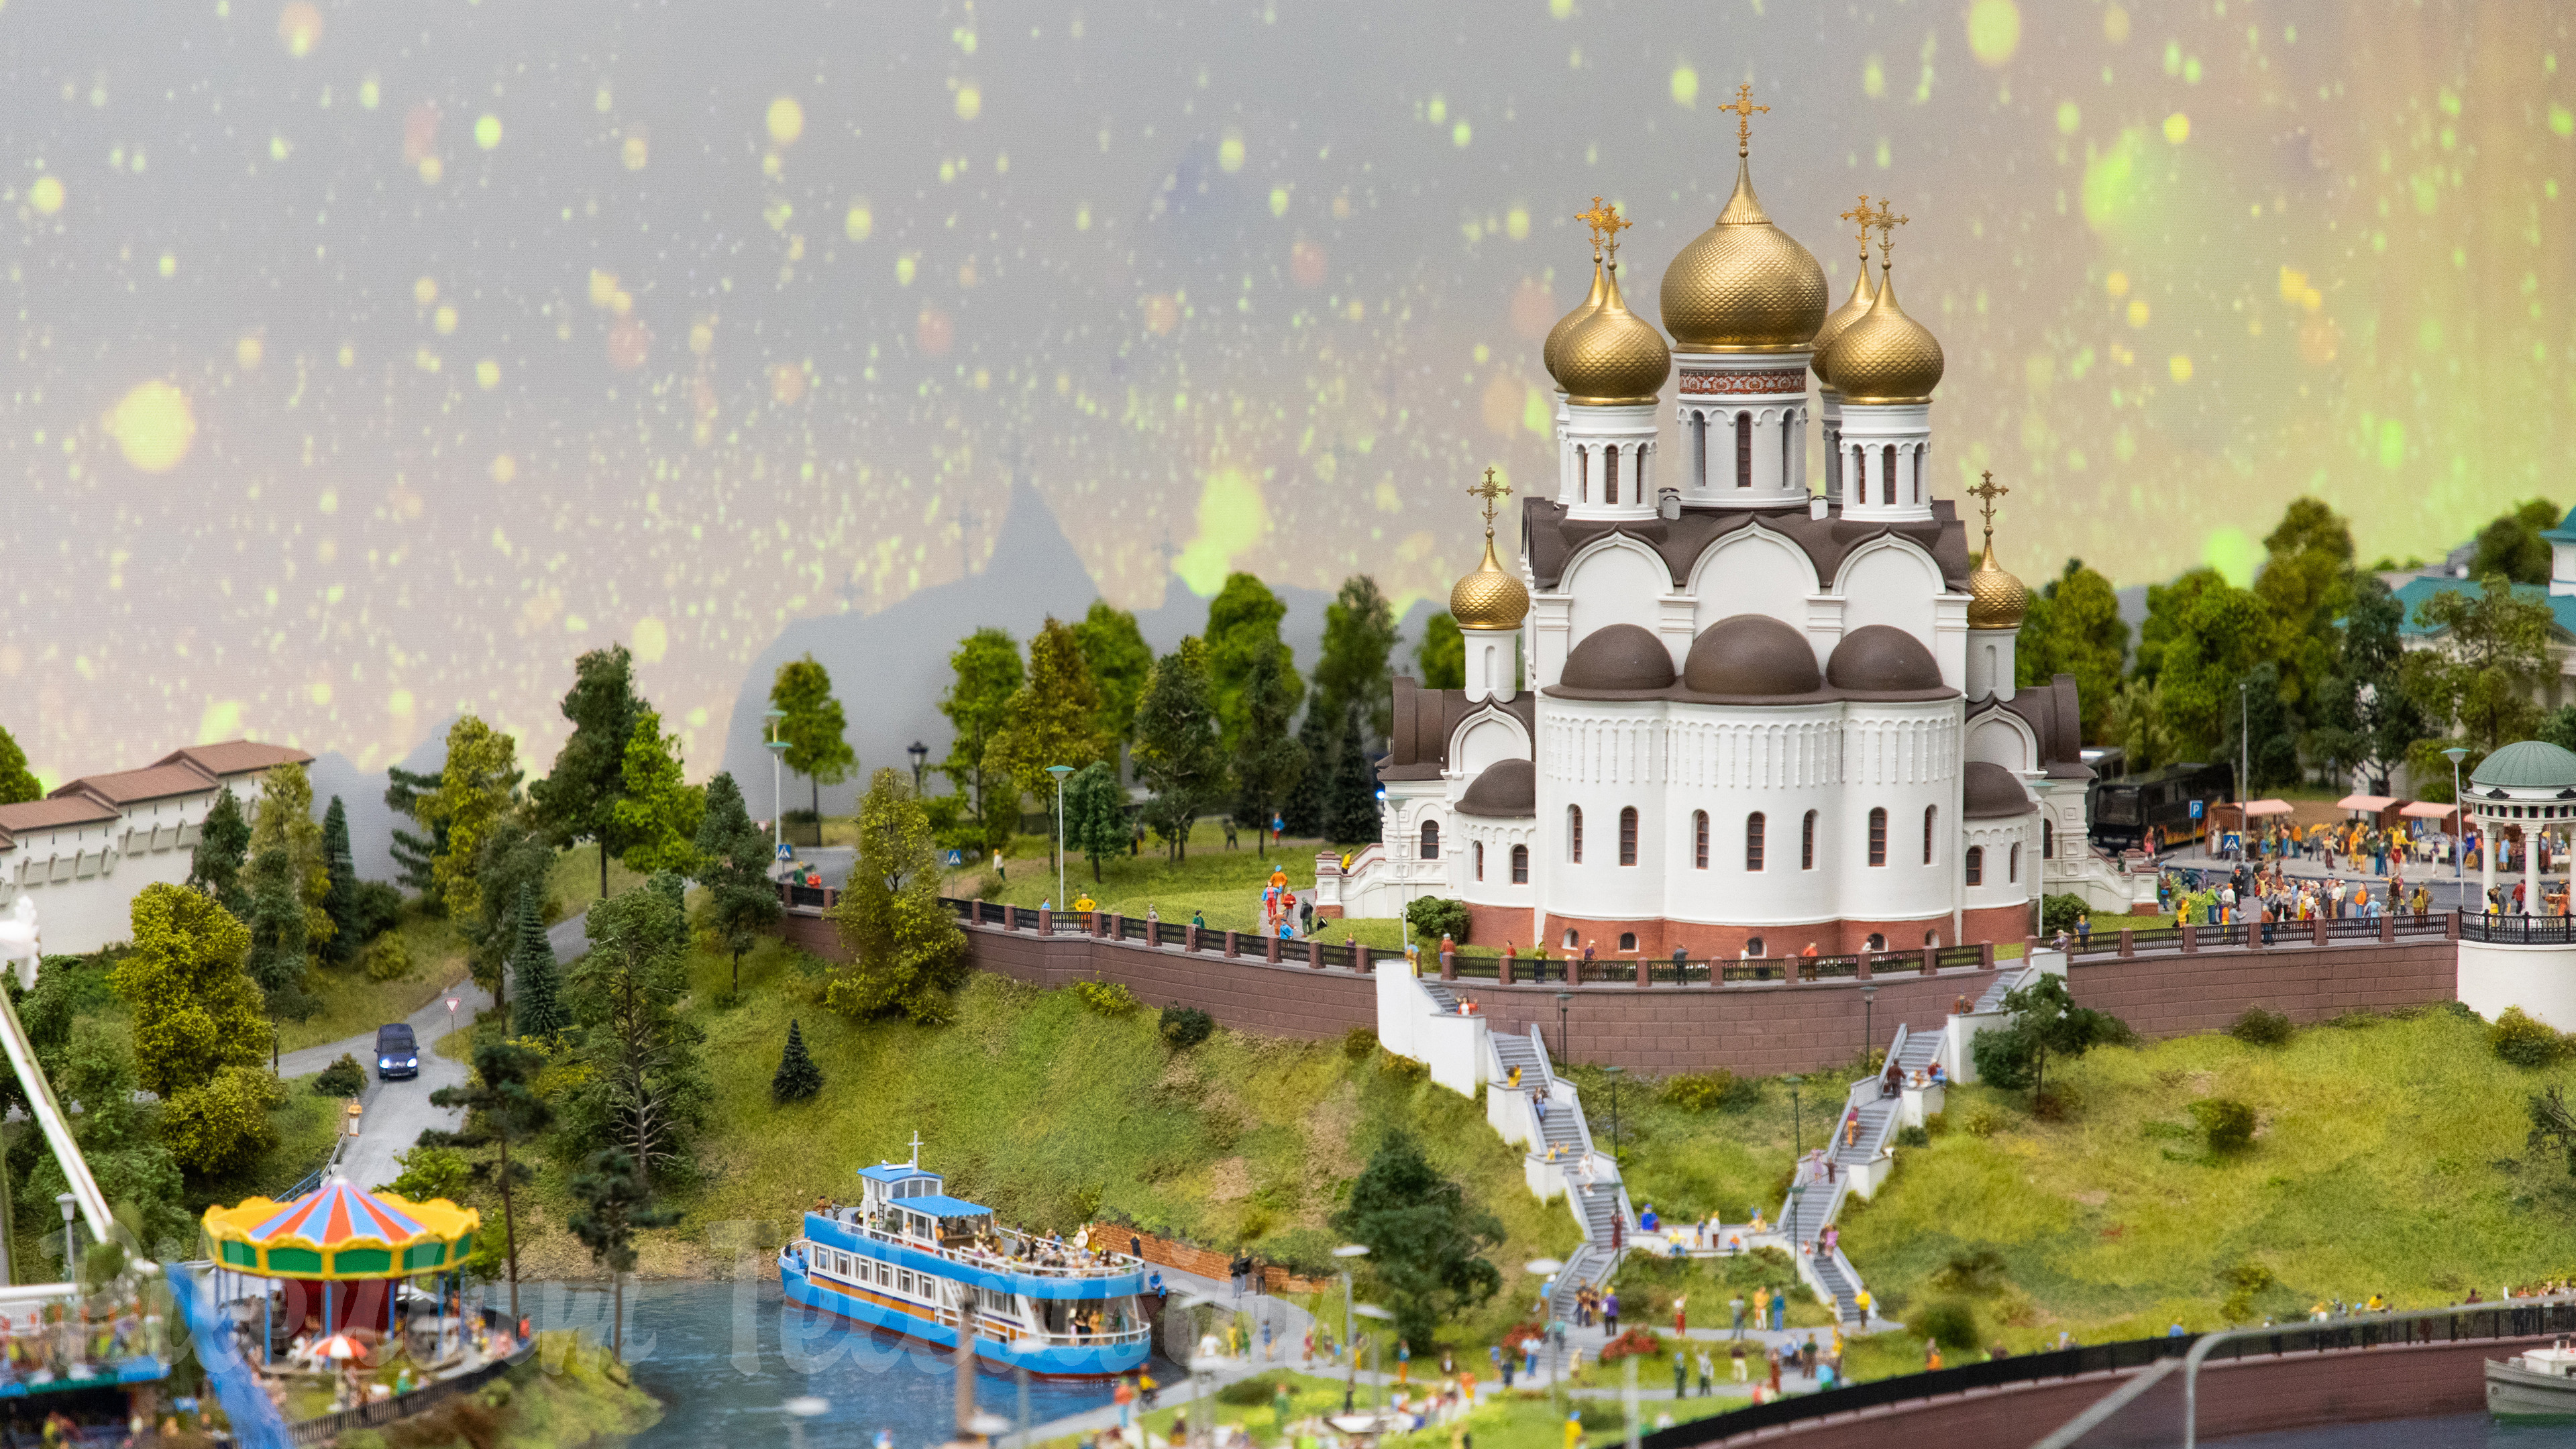 Model trains in Russia - One of the most beautiful HO scale model railway layouts - Макет Золотого кольца России